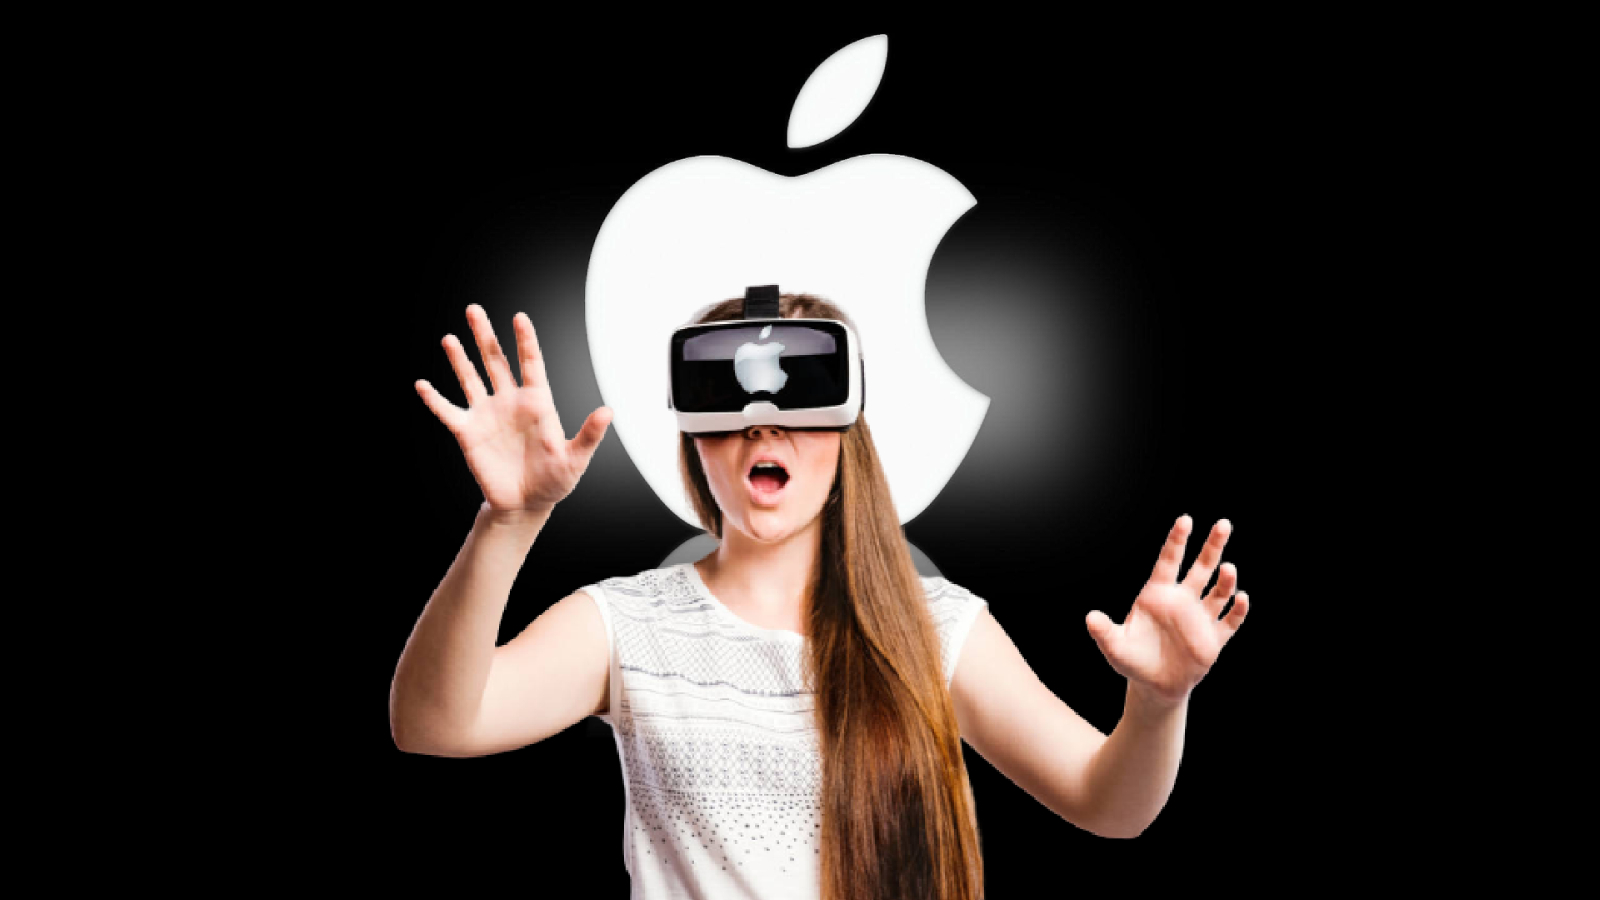 Dive into Virtual Reality with iPhone-Optimized VR Gear